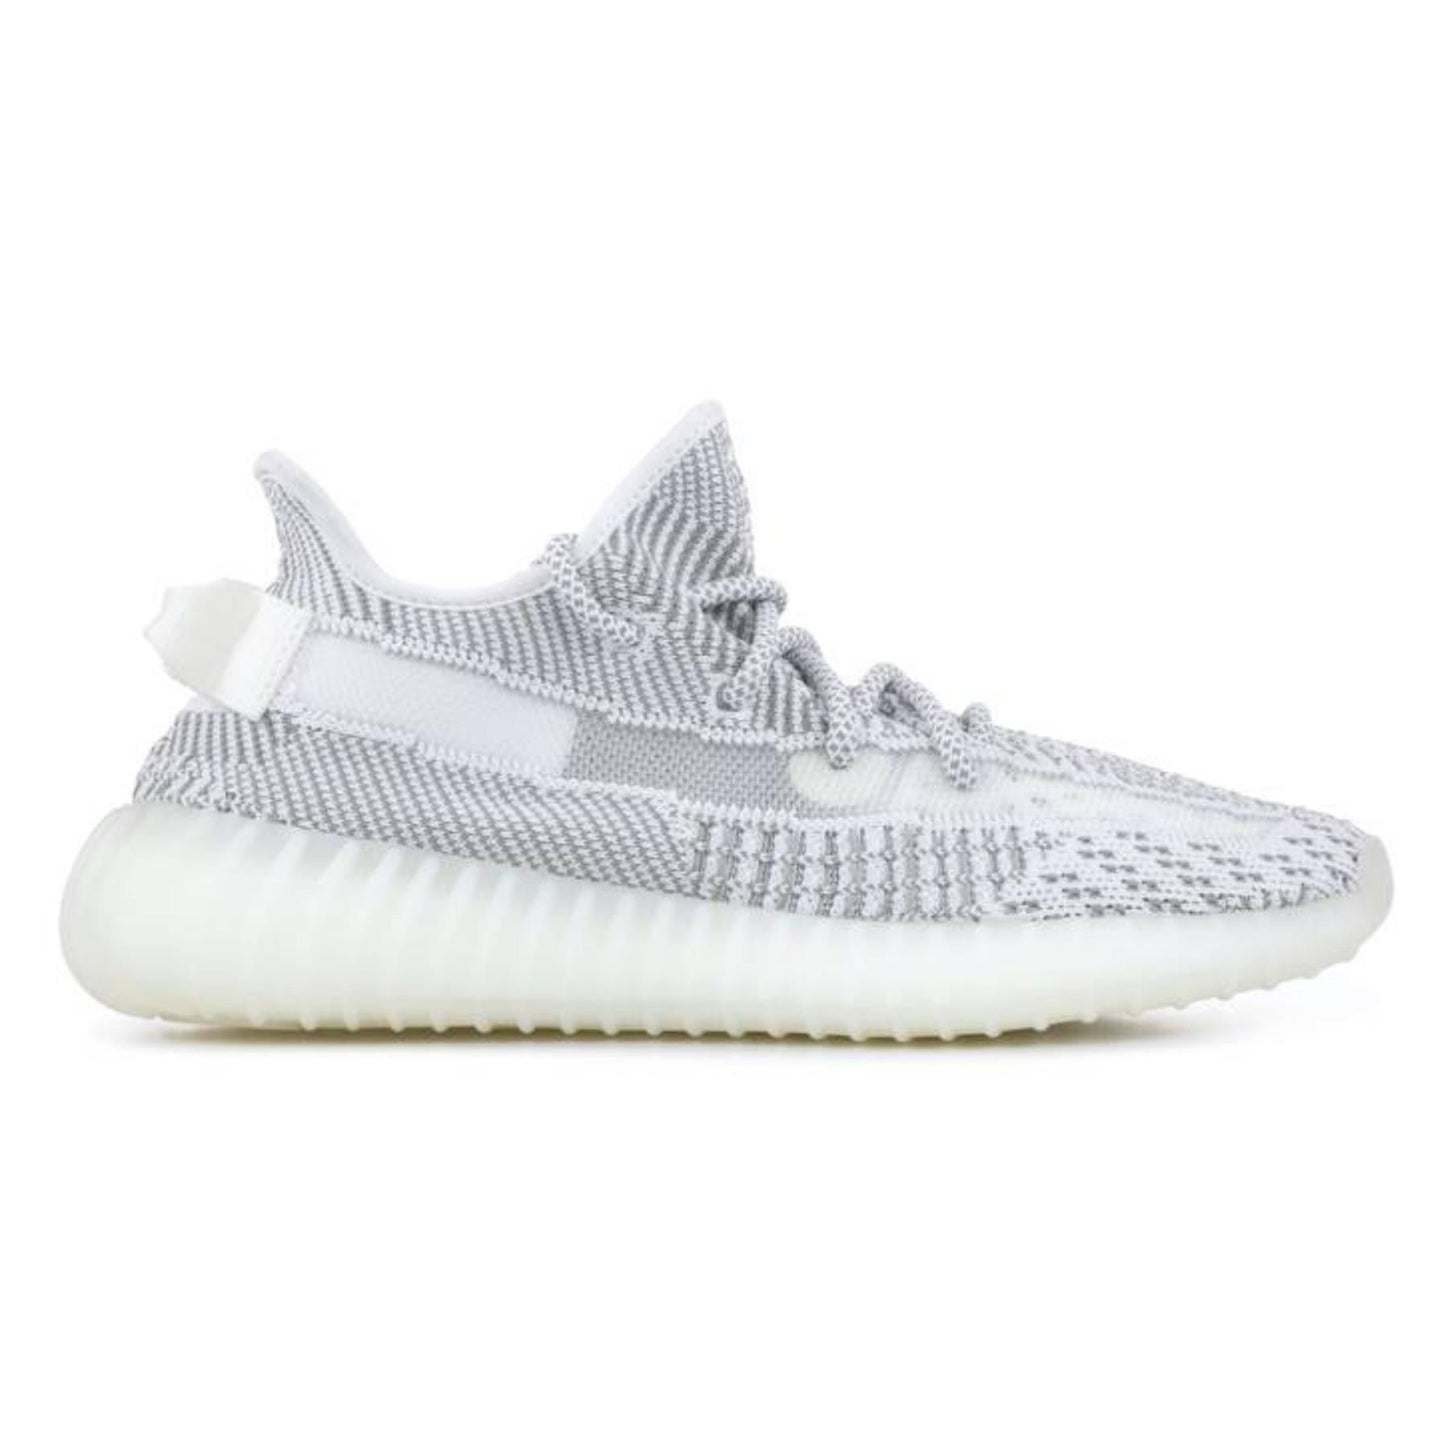 Yeezy Boost 350 V2 'Static' (Non-Reflective)